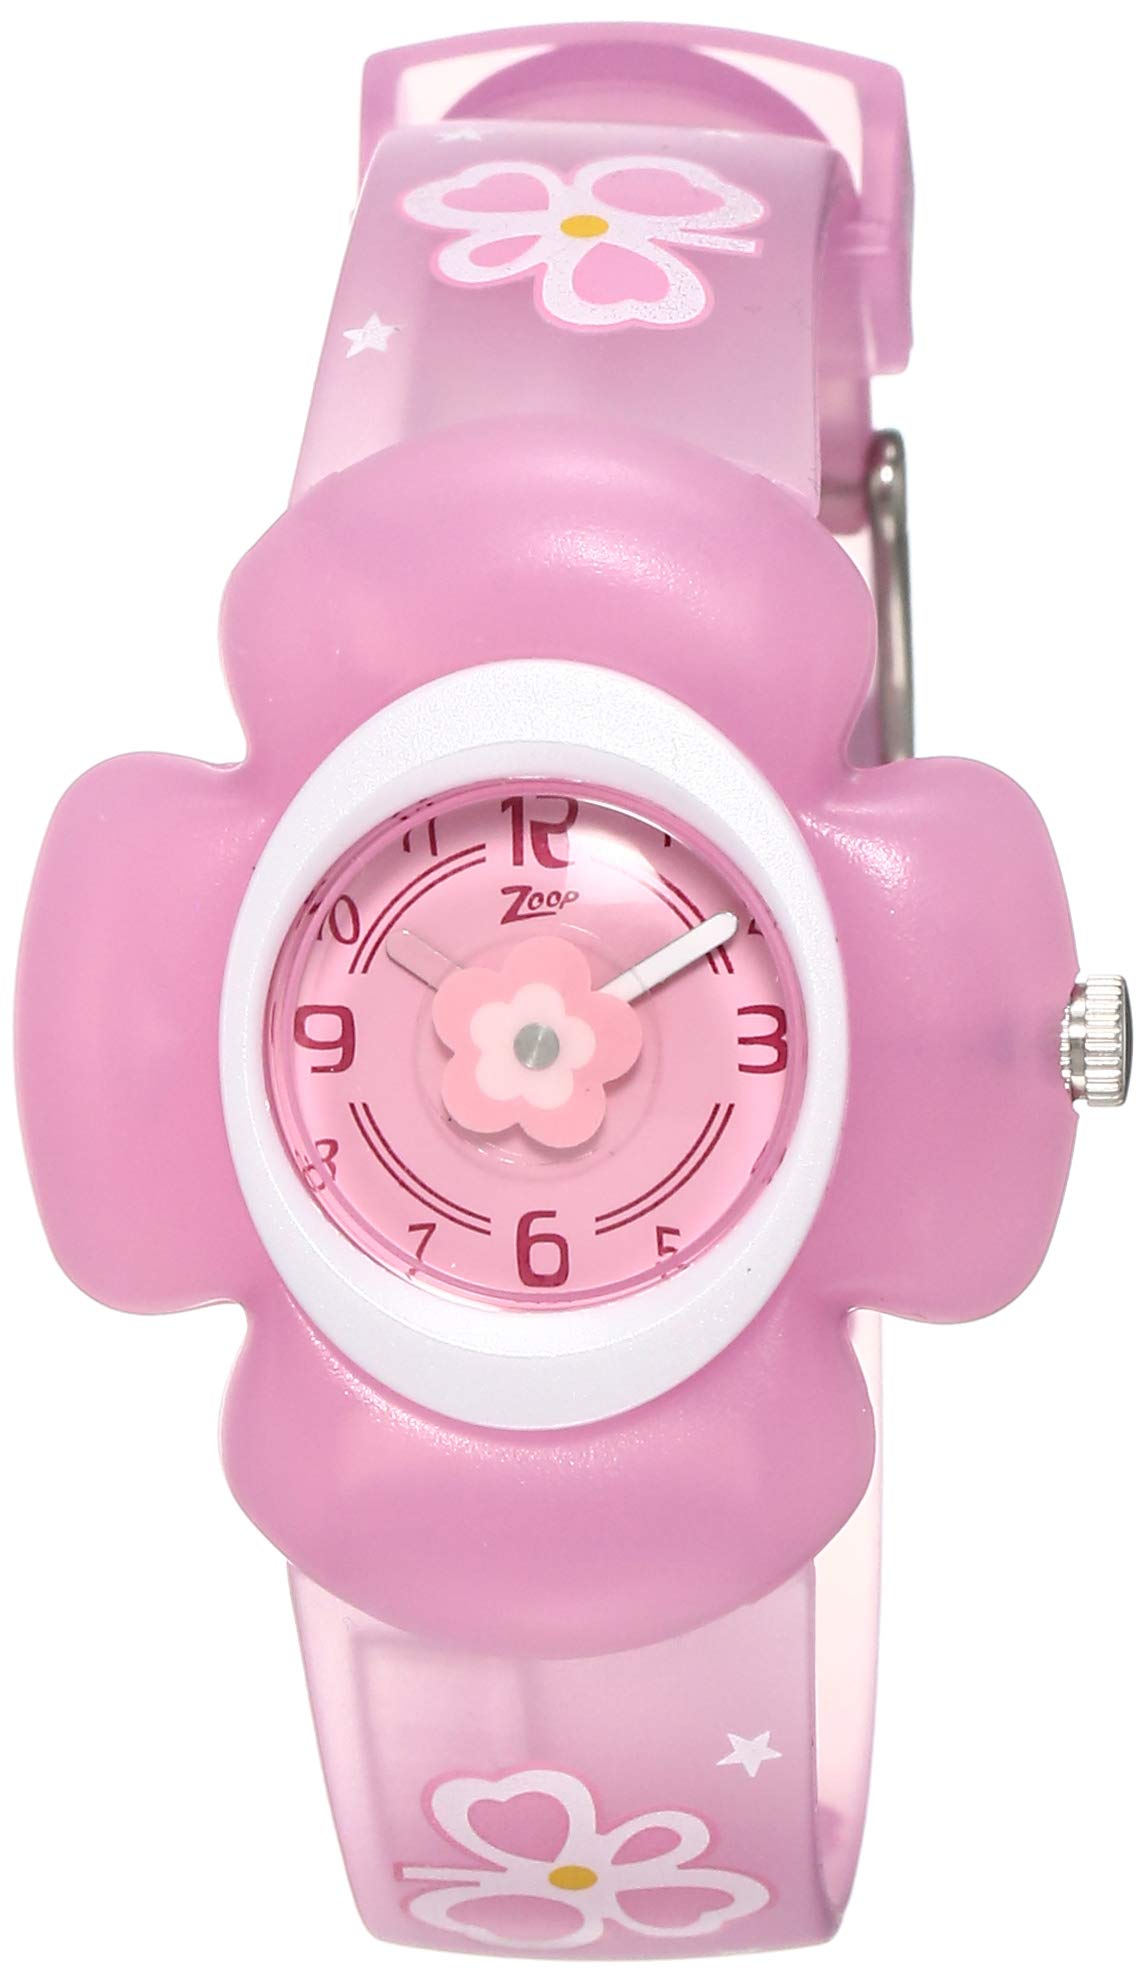 Zoop By Titan Kids’s Watch Zoop Collection Analog, Pink Dial Pink Plastic Band, 4008PP01